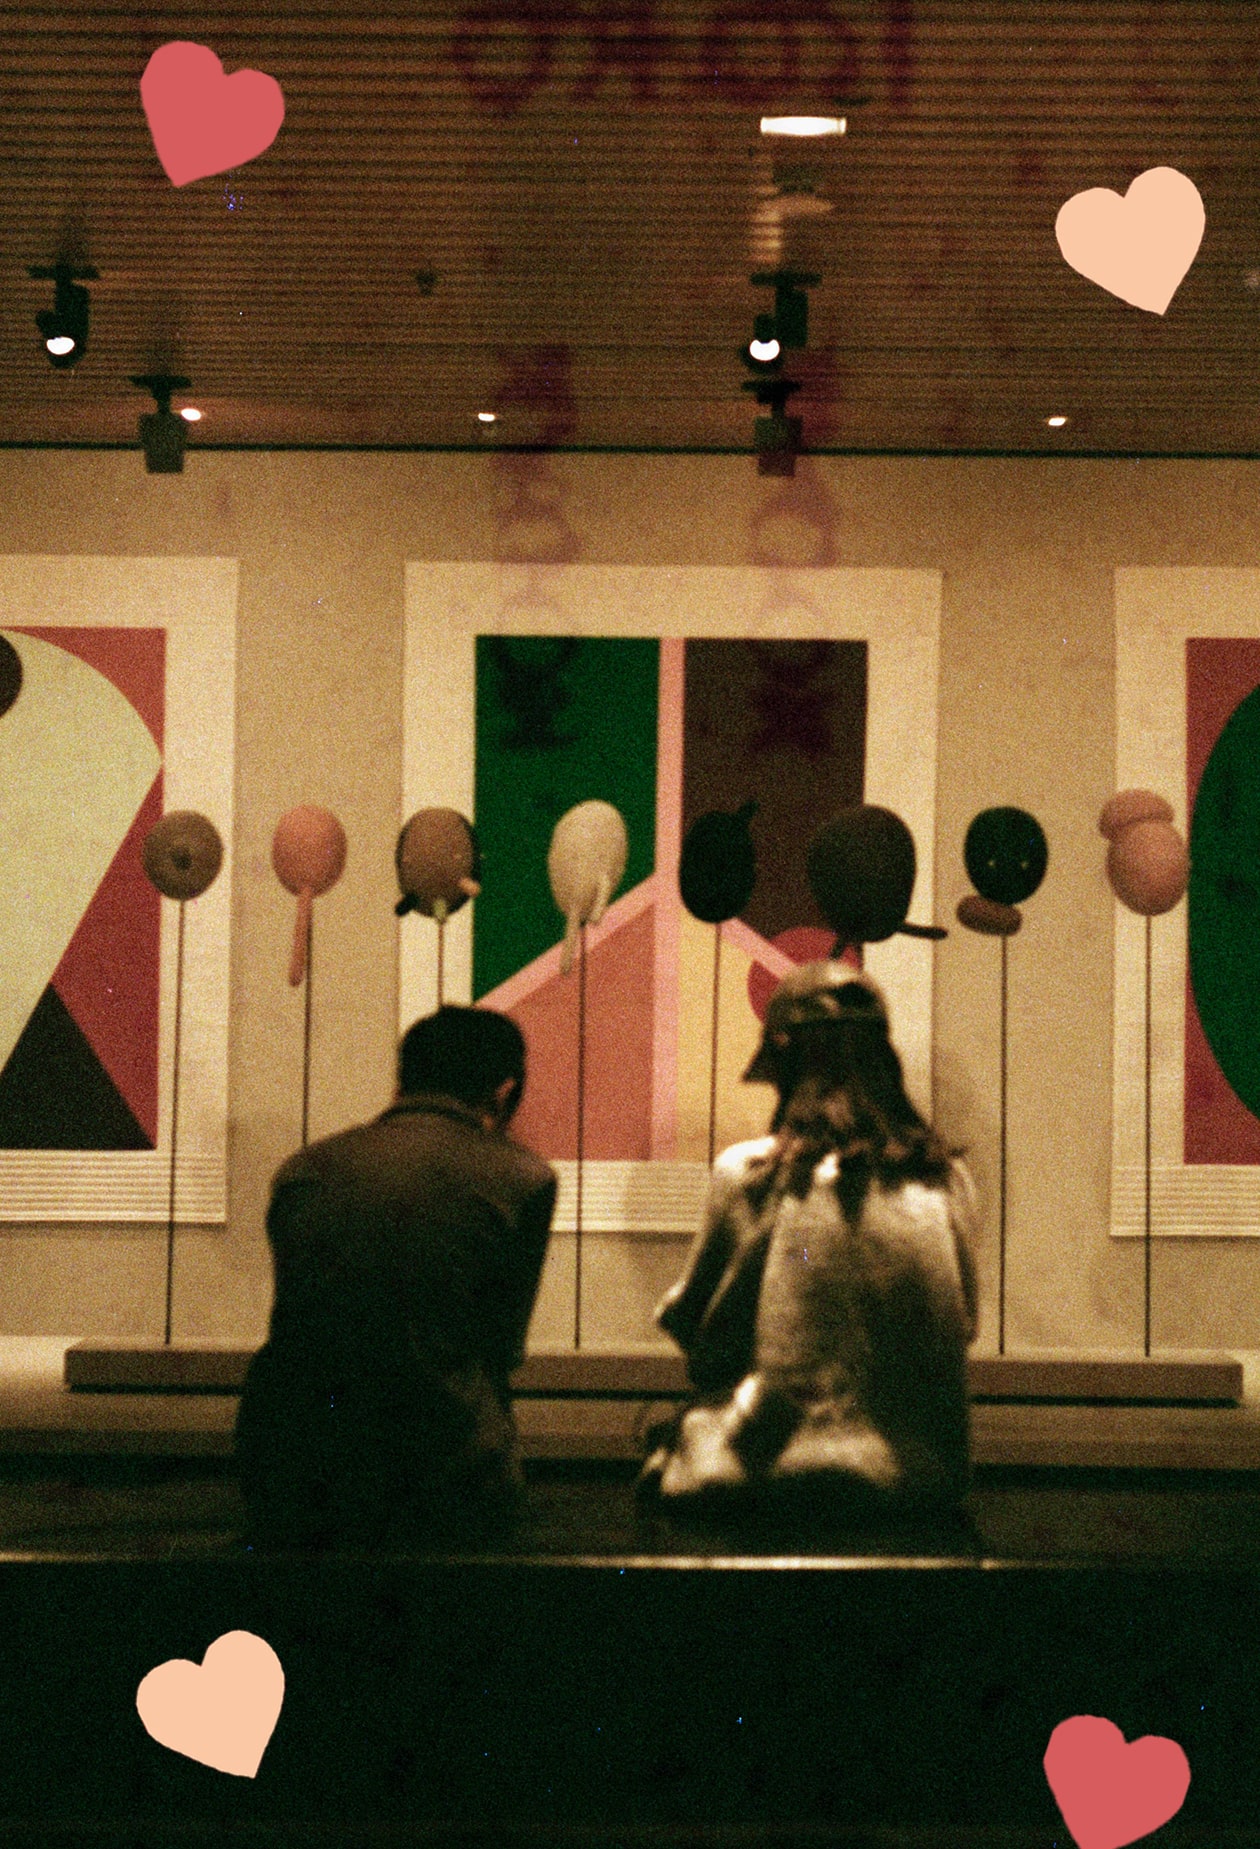 couple stand in front of sculptures and artwork at a gallery. shot on film. scattered hearts decorate the image.